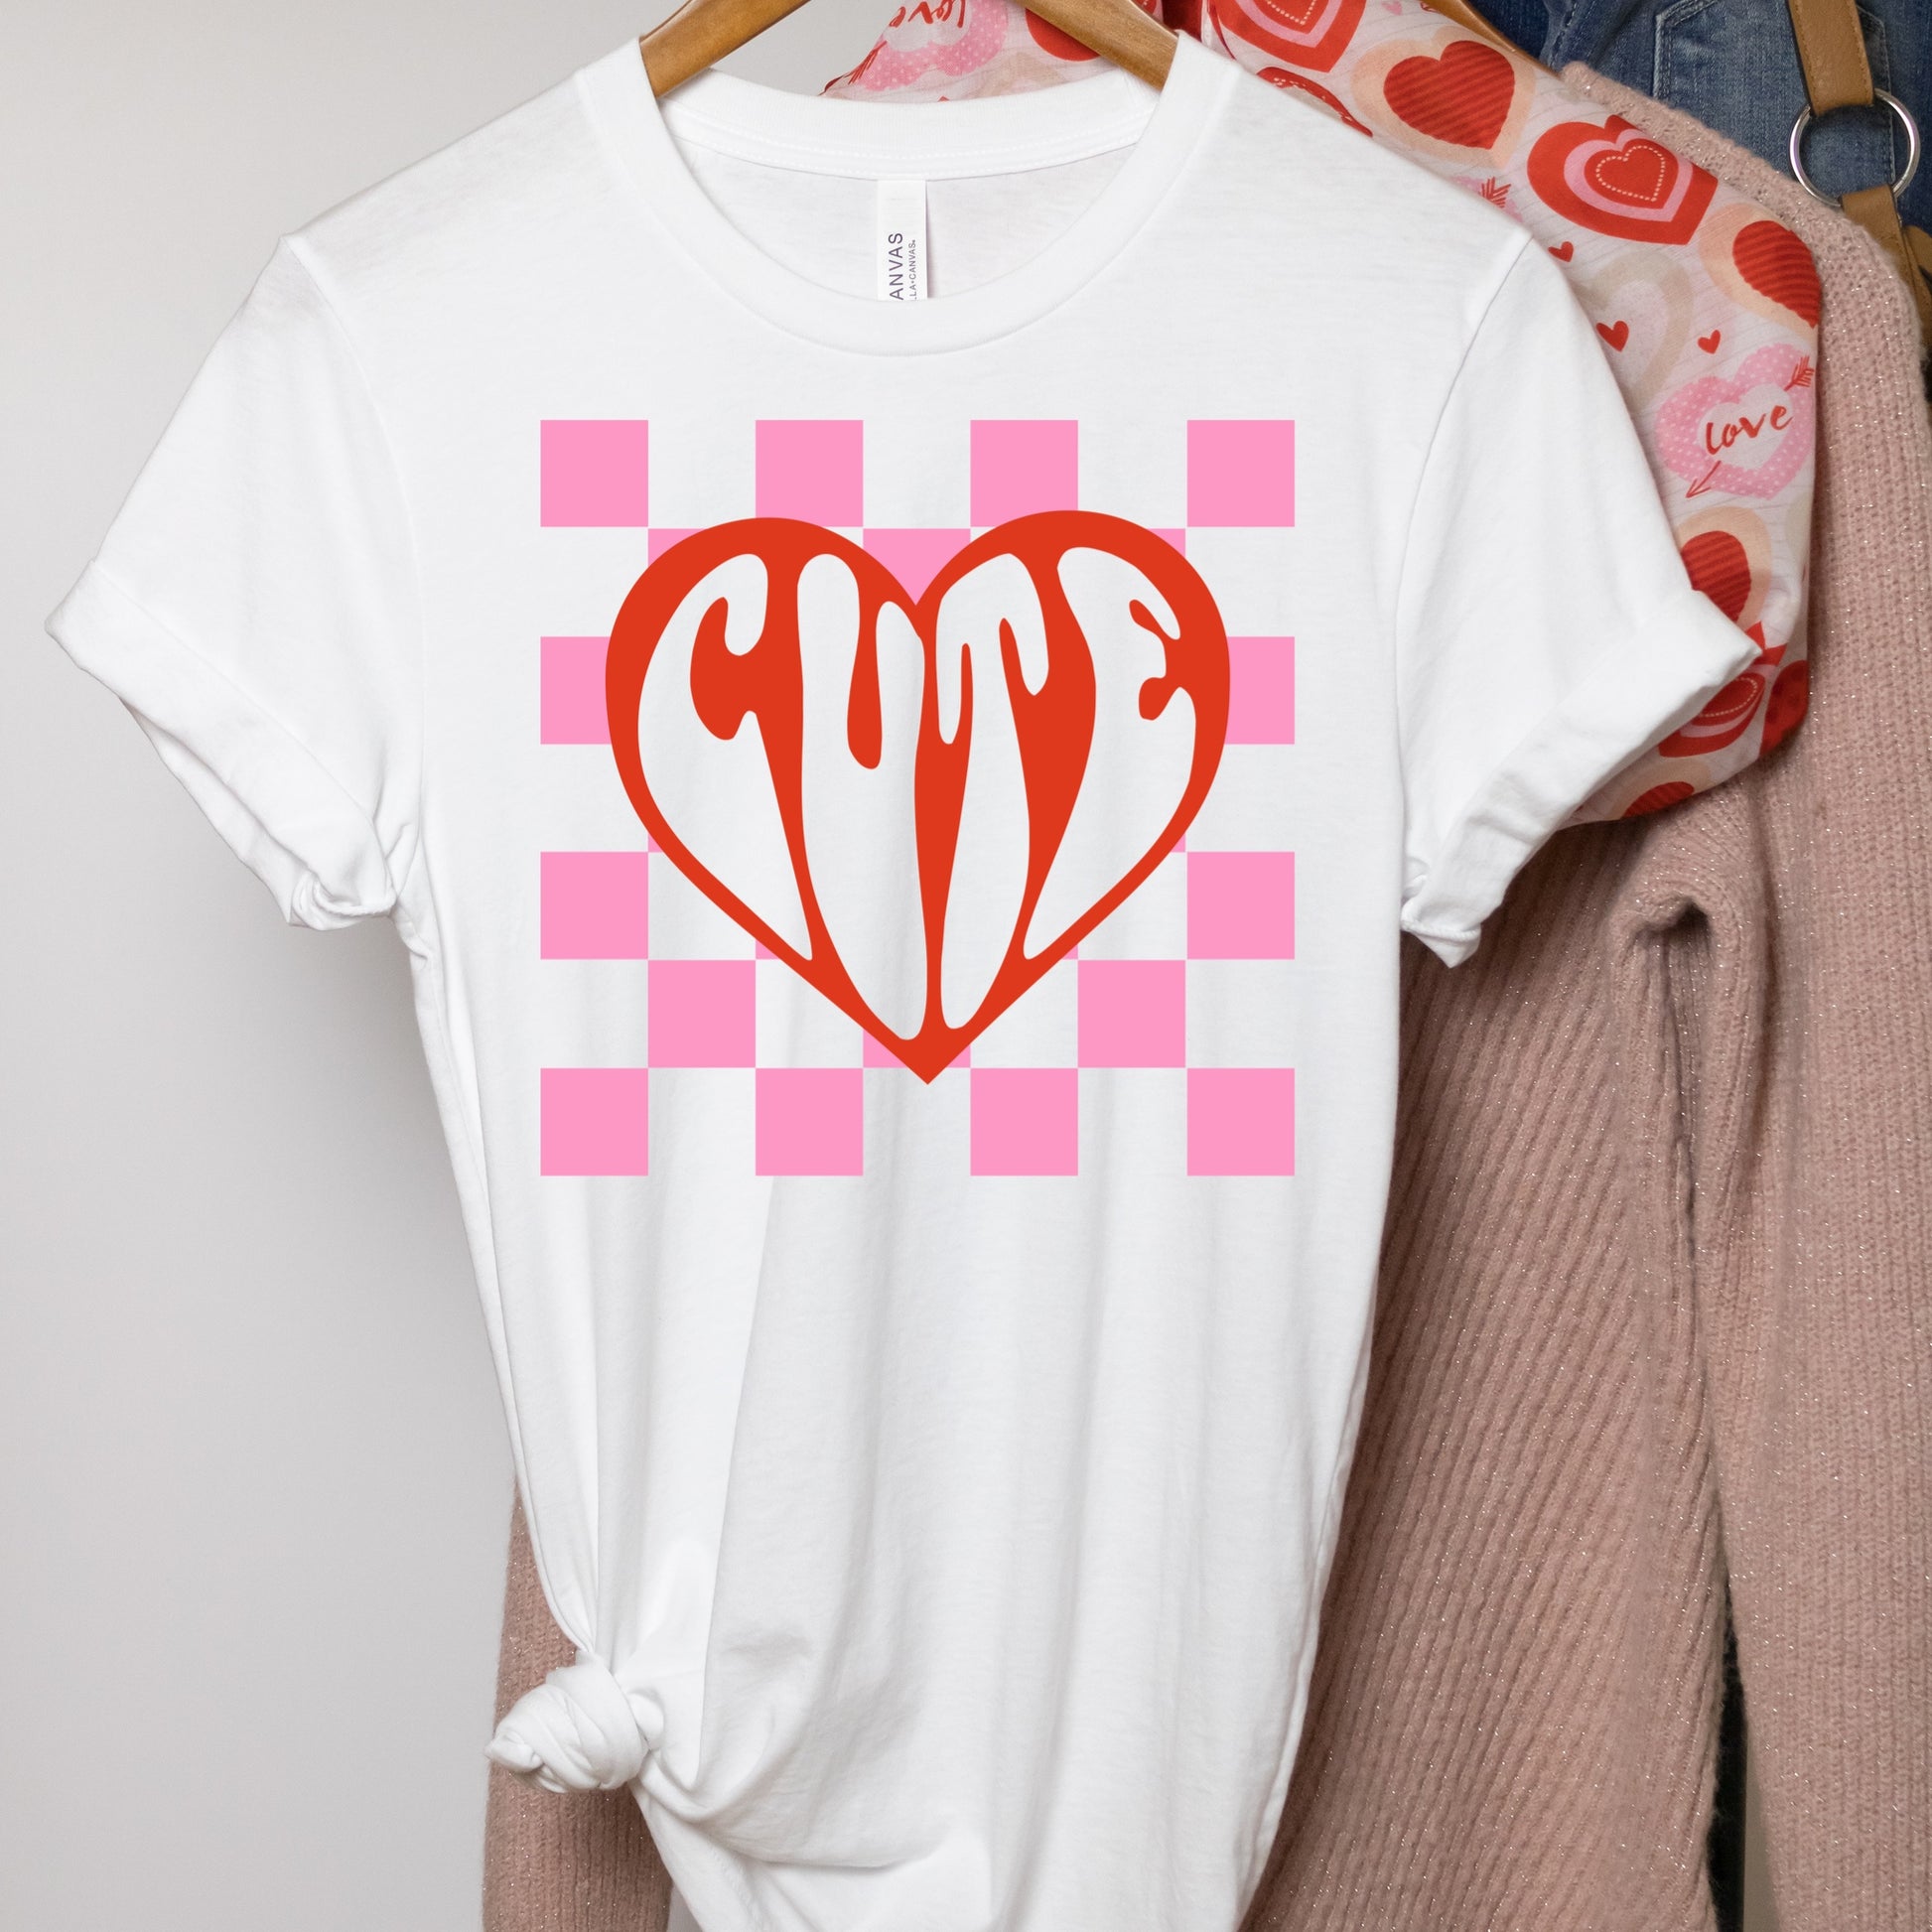 Valentine's Day Iron On Transfers - Cute Checkered Sublimation and